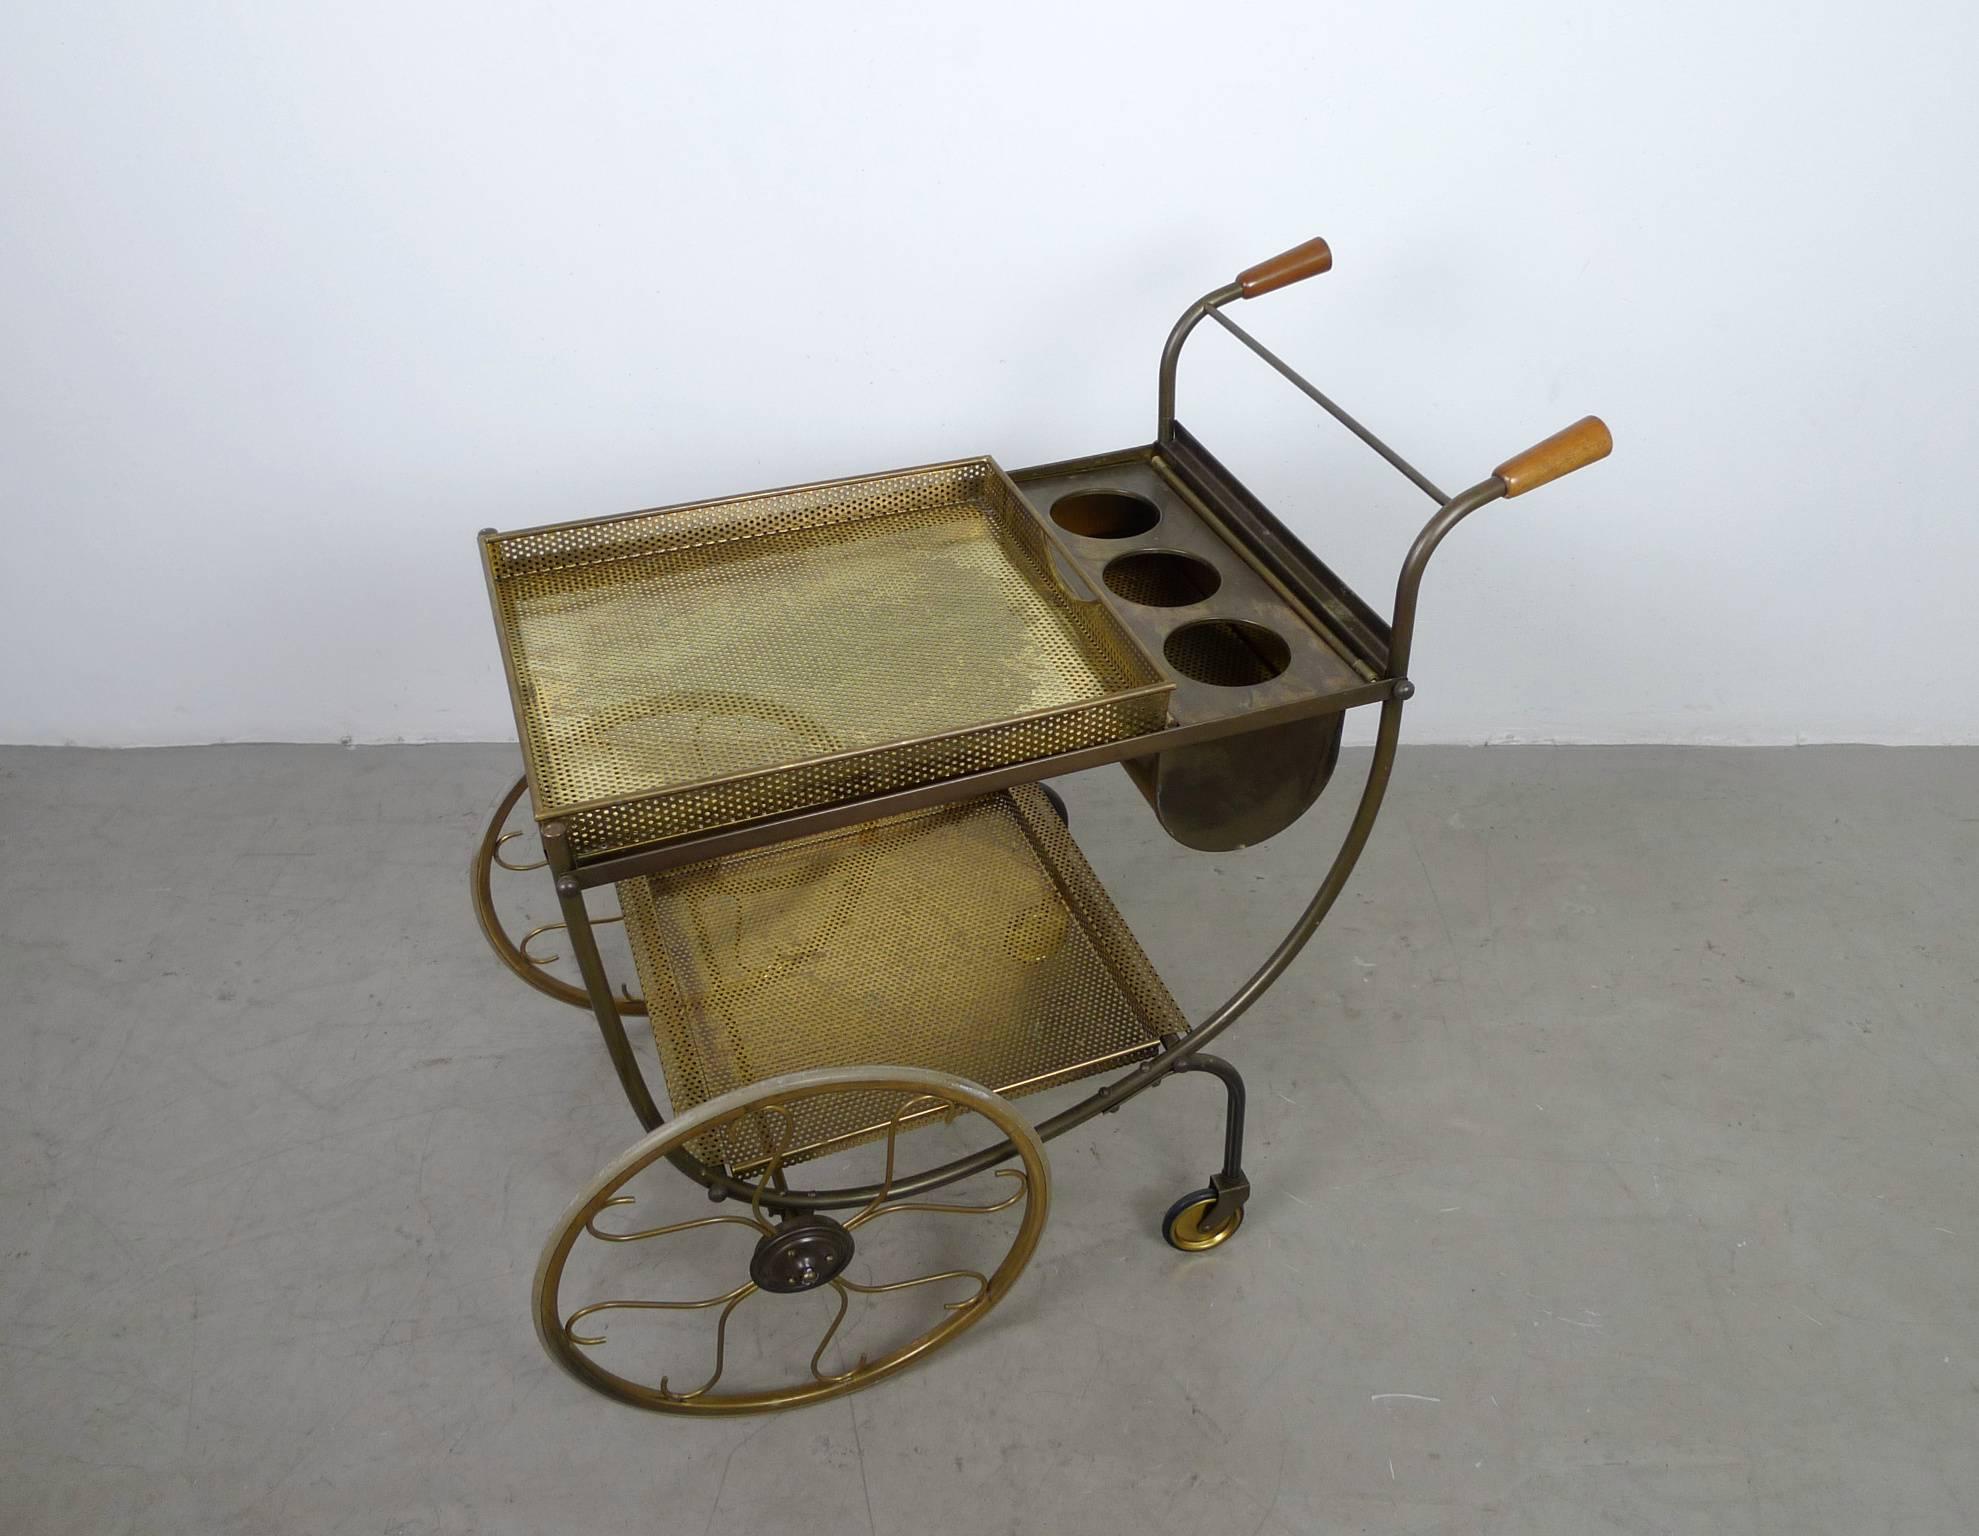 This serving trolley has large brass wheels and two wooden handles. The upper and lower shelves and the curved bottle holder are removable. The top shelf is equipped with a tray and carrying handles for serving. The trolley was designed by Josef